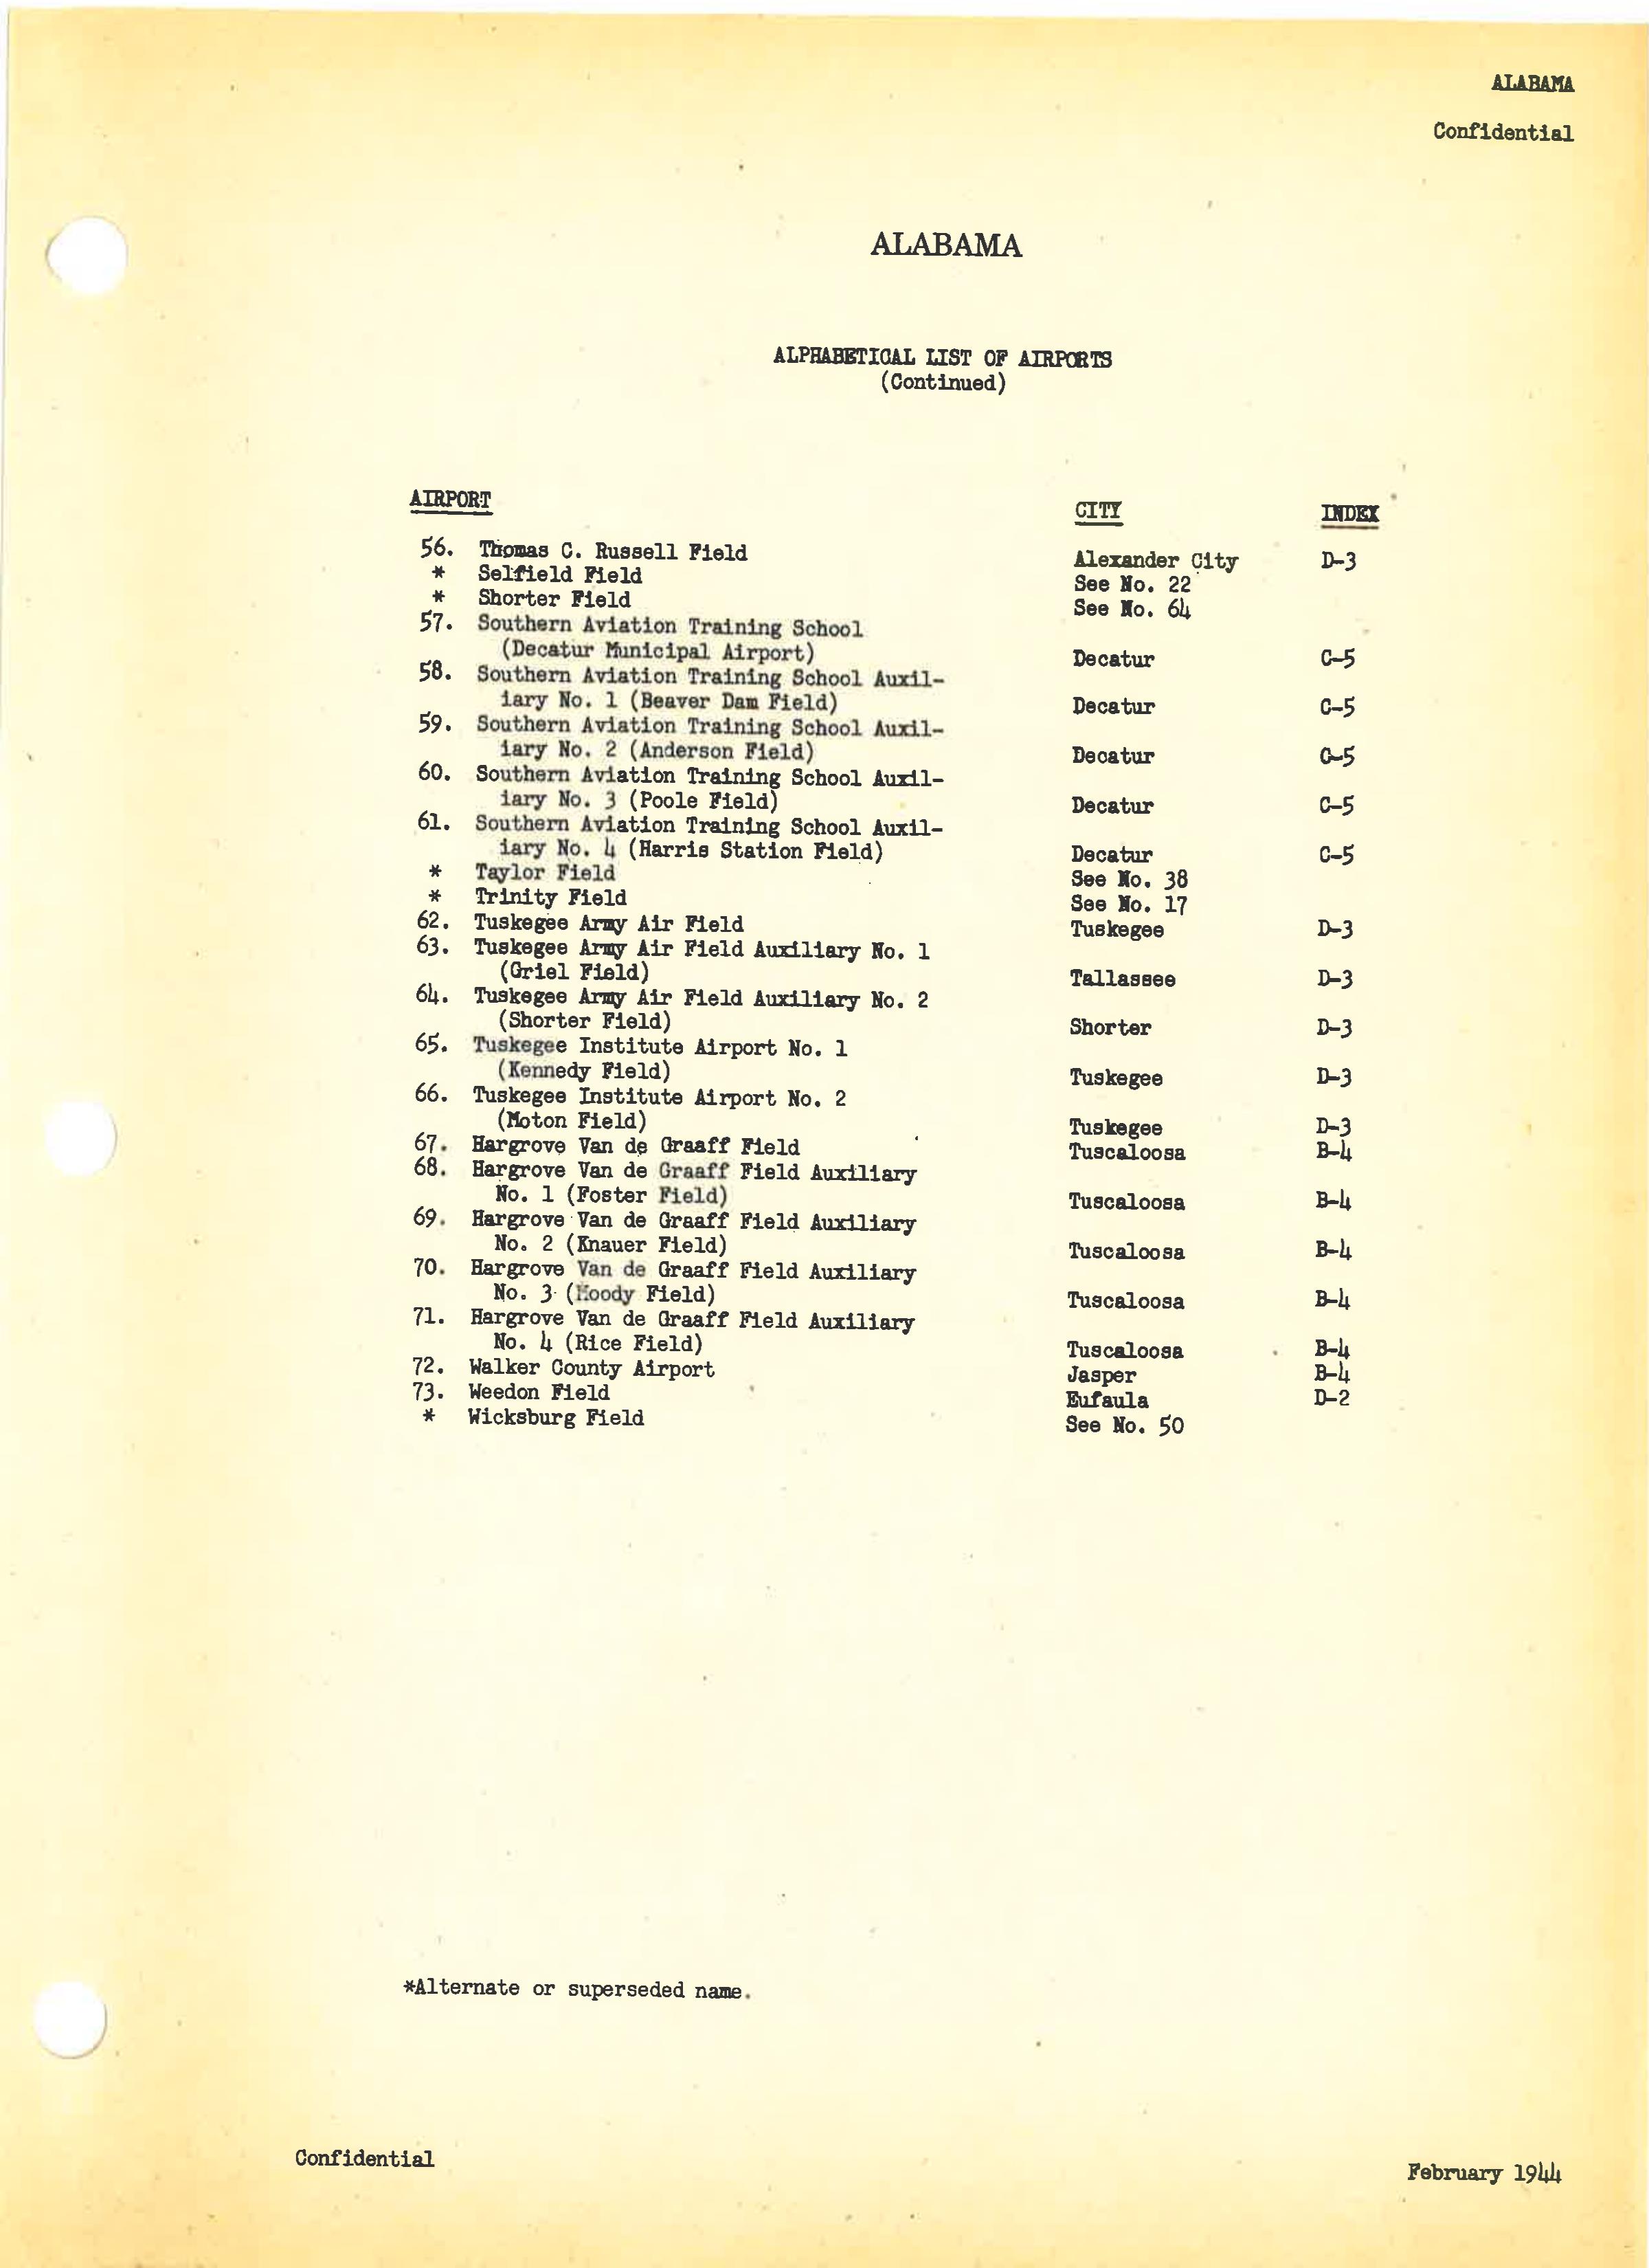 Sample page 12 from AirCorps Library document: Airport Directory of the Continental United States Vol. 1 (AL thru KY)